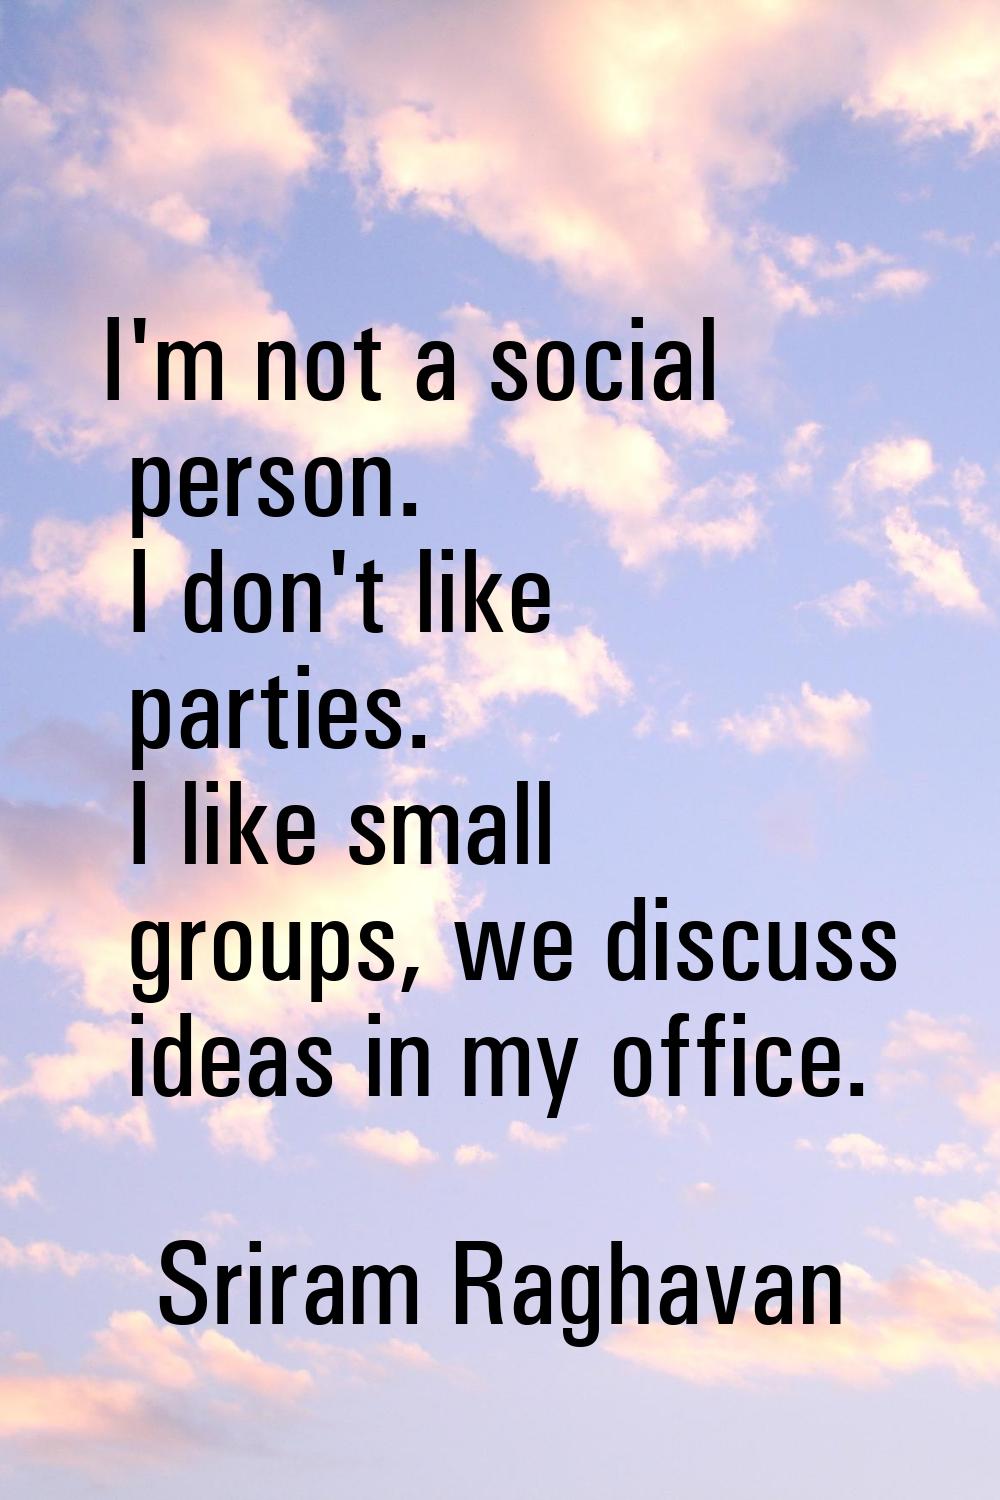 I'm not a social person. I don't like parties. I like small groups, we discuss ideas in my office.